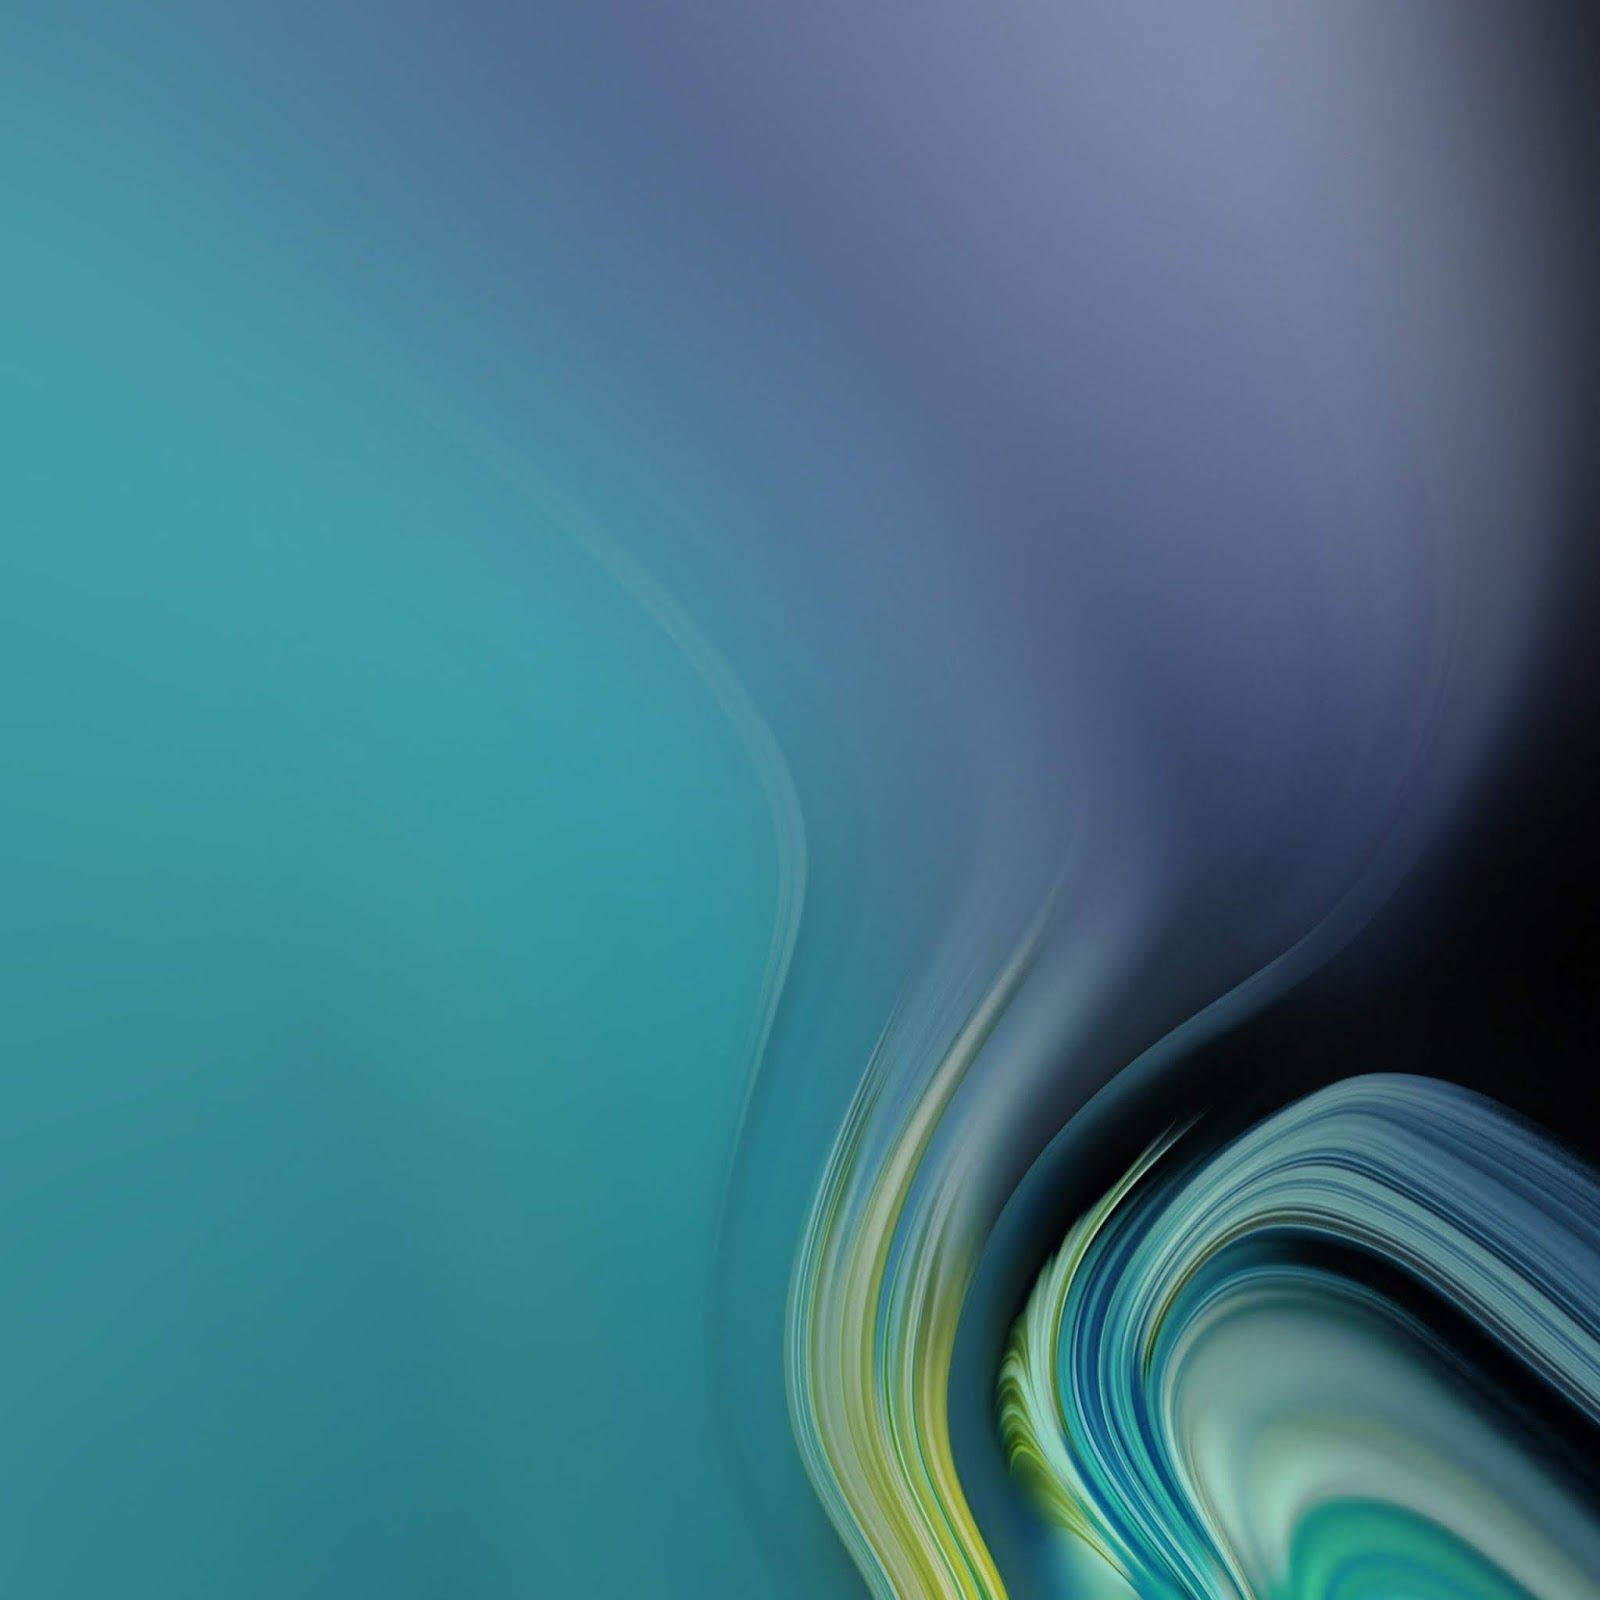 Colorful style with the Samsung Galaxy Note 10 Wallpaper